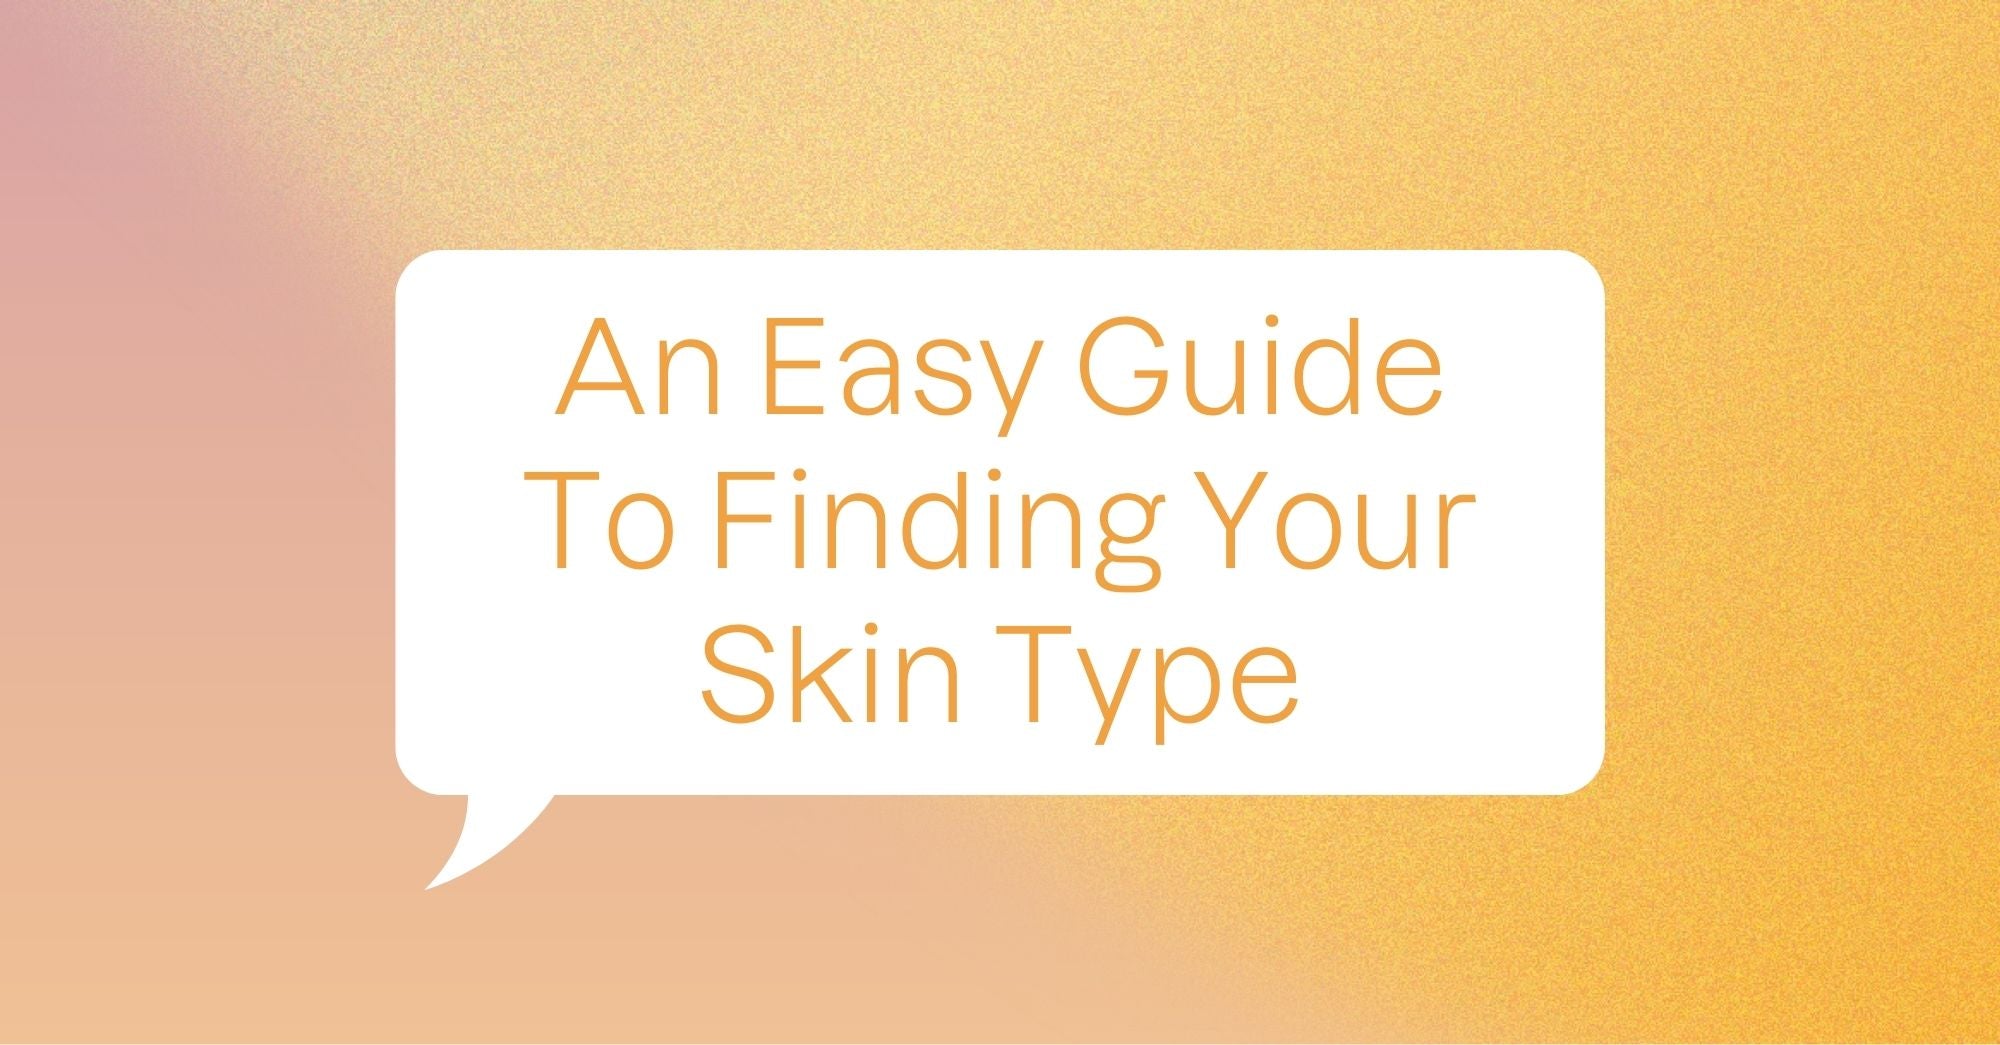 An Easy Guide To Finding Your Skin Type